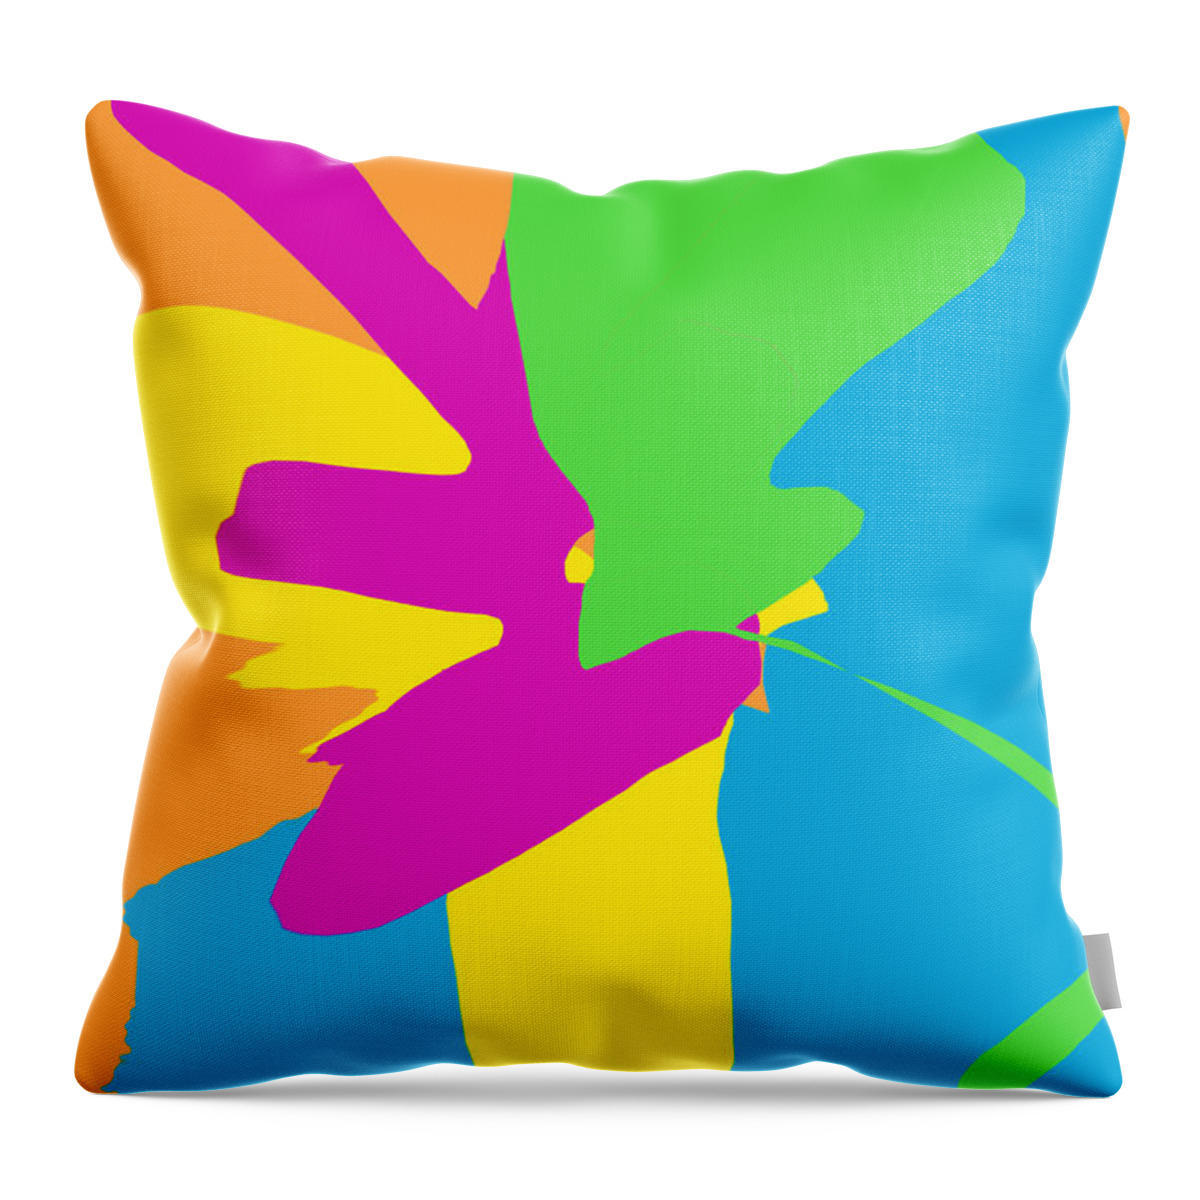 Abstract Art Paintings Flowers In Vase Throw Pillow featuring the painting Original Contemporary Abstract Painting Happy Flowers by RjFxx at beautifullart com Friedenthal